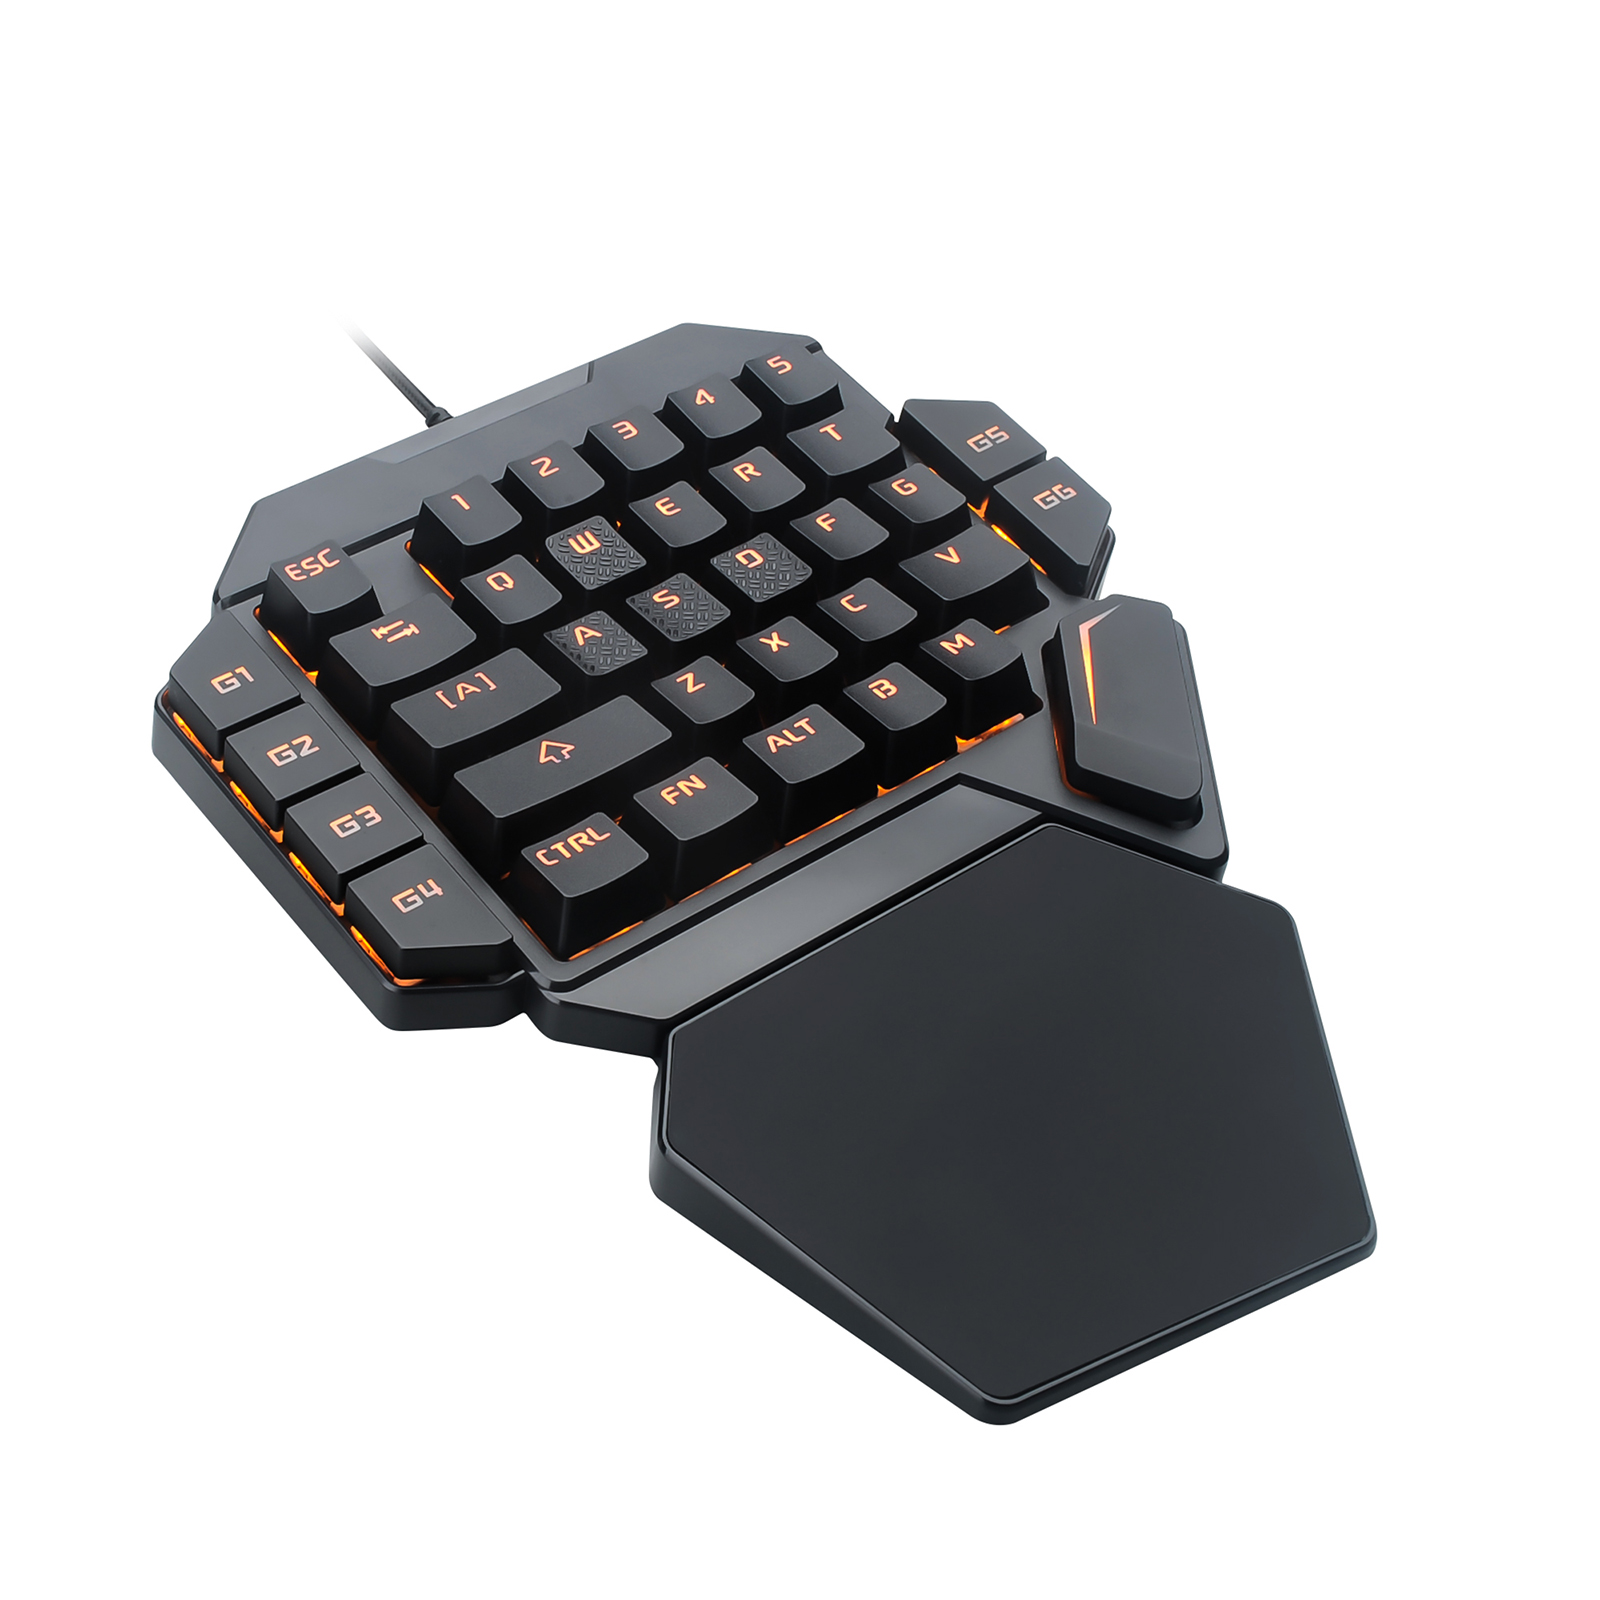 Wired one-hand gaming keyboard RK-X32